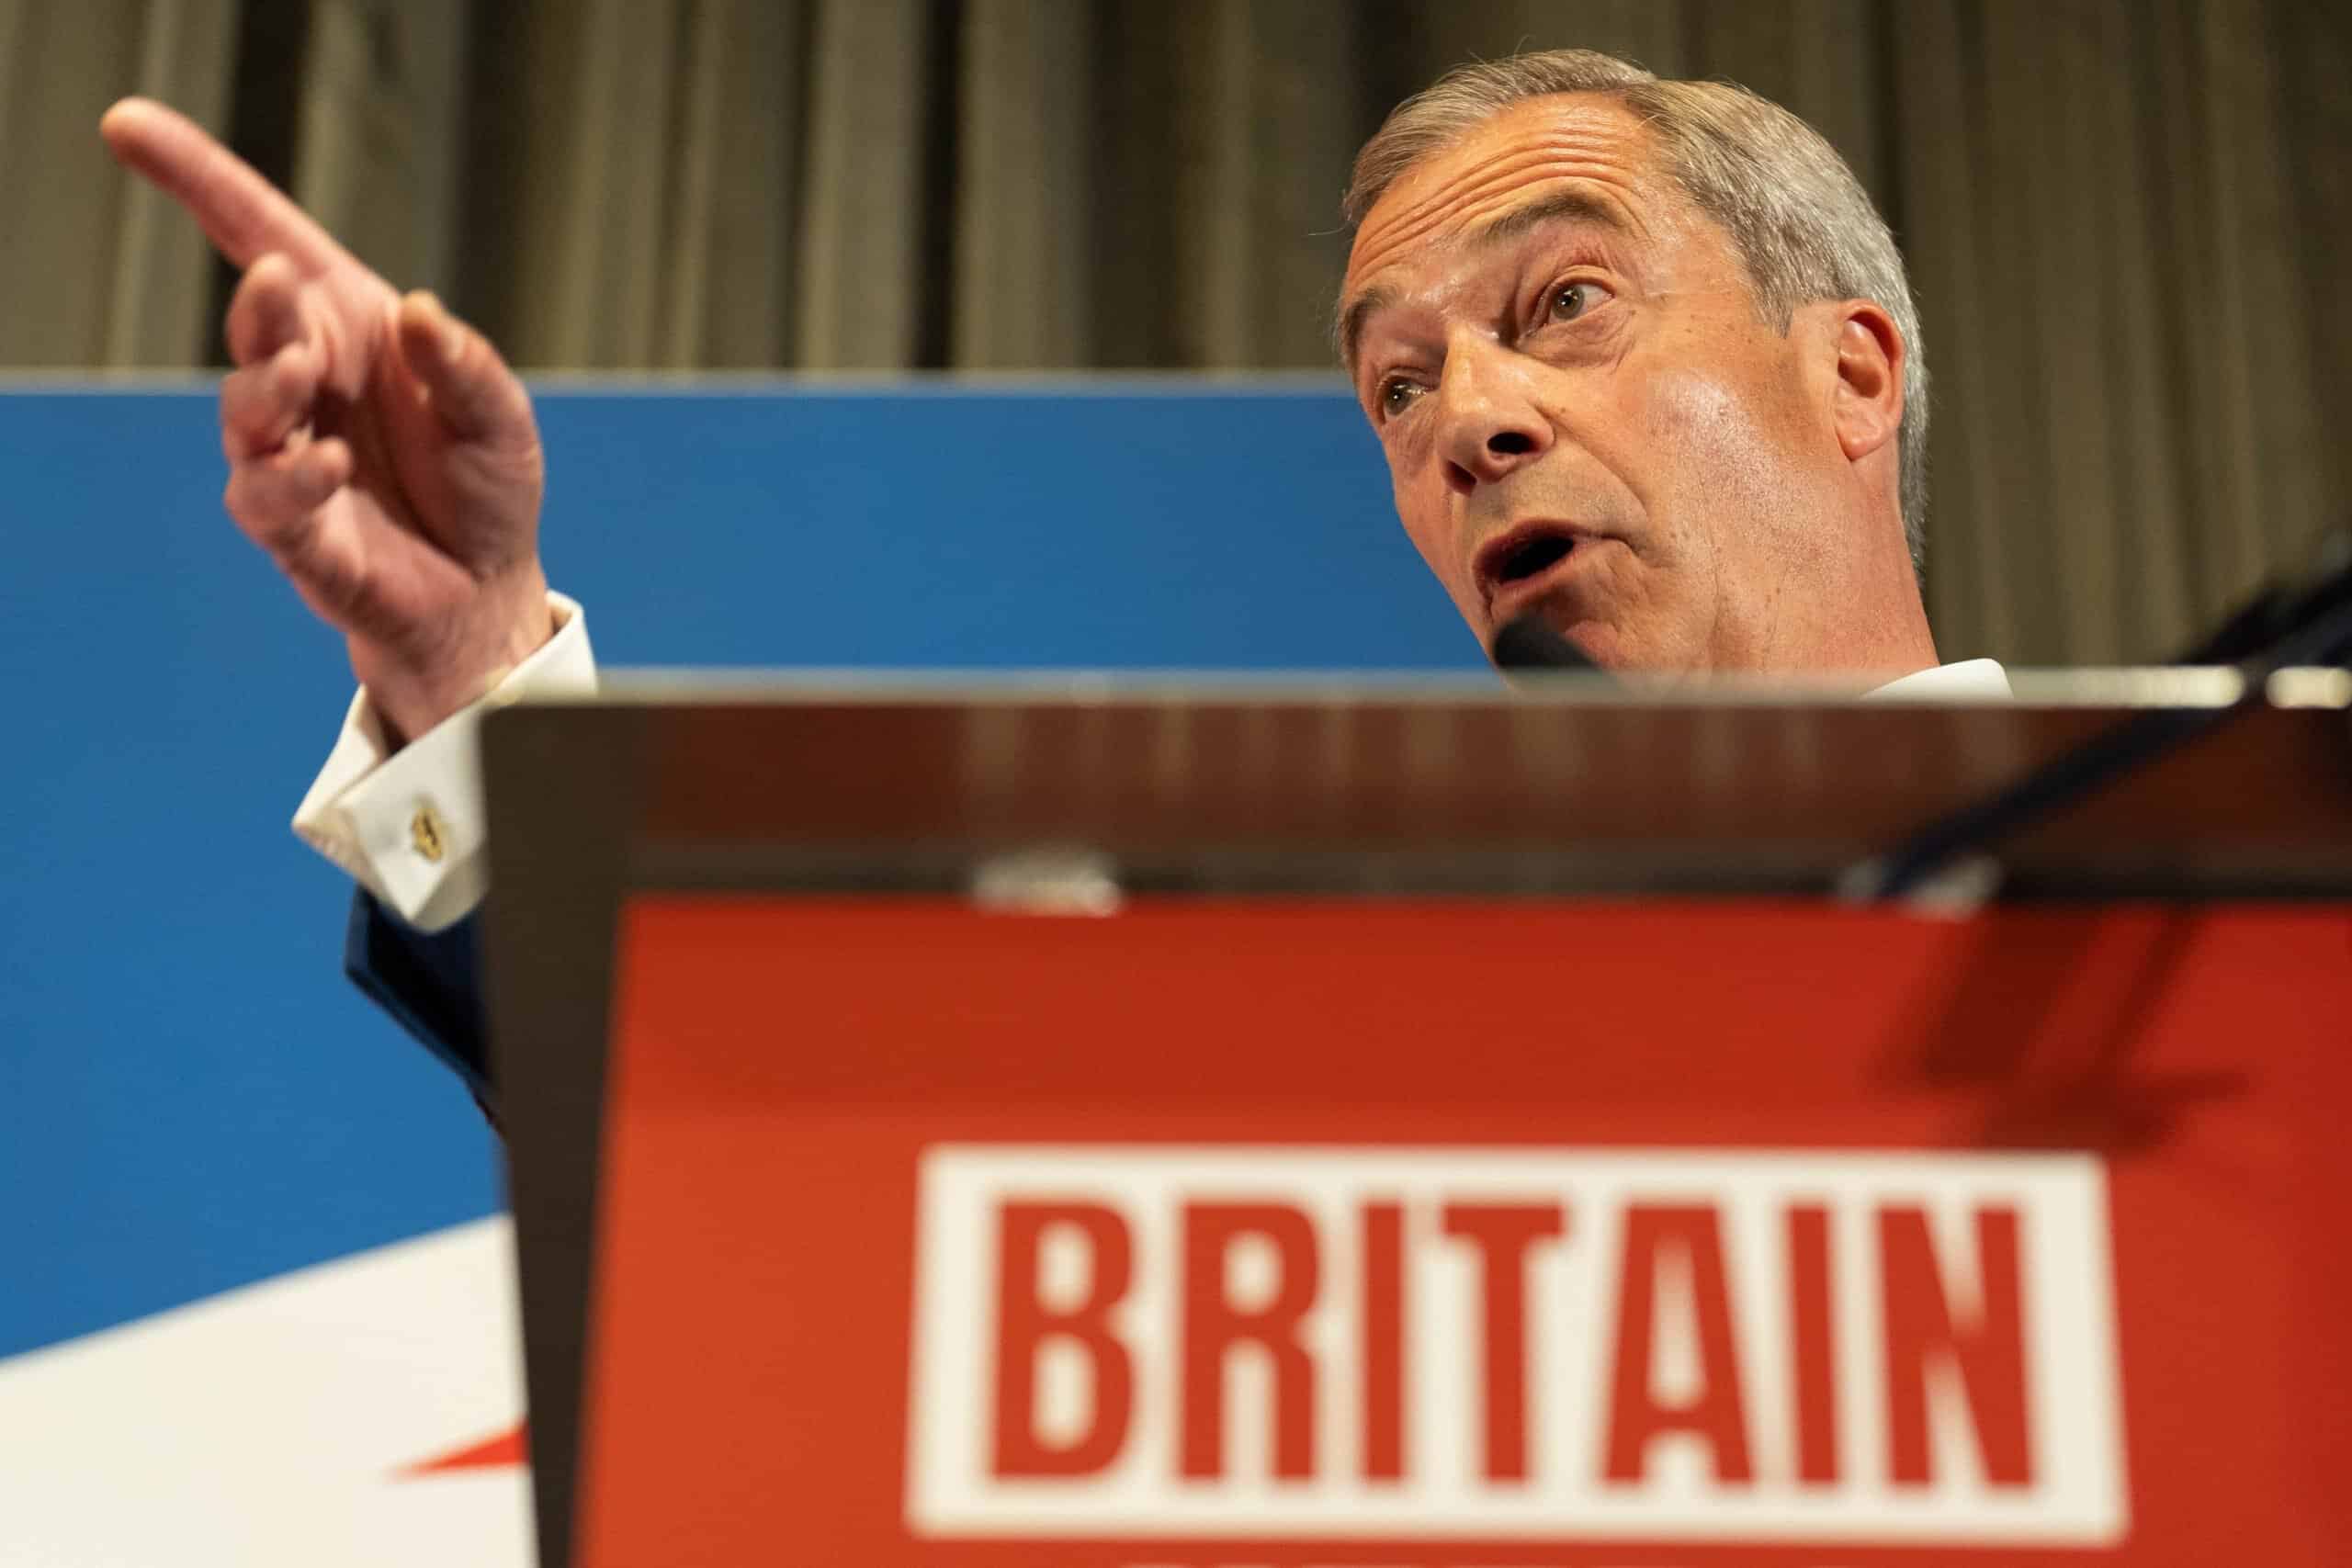 Nigel Farage to stand for Reform UK in Clacton